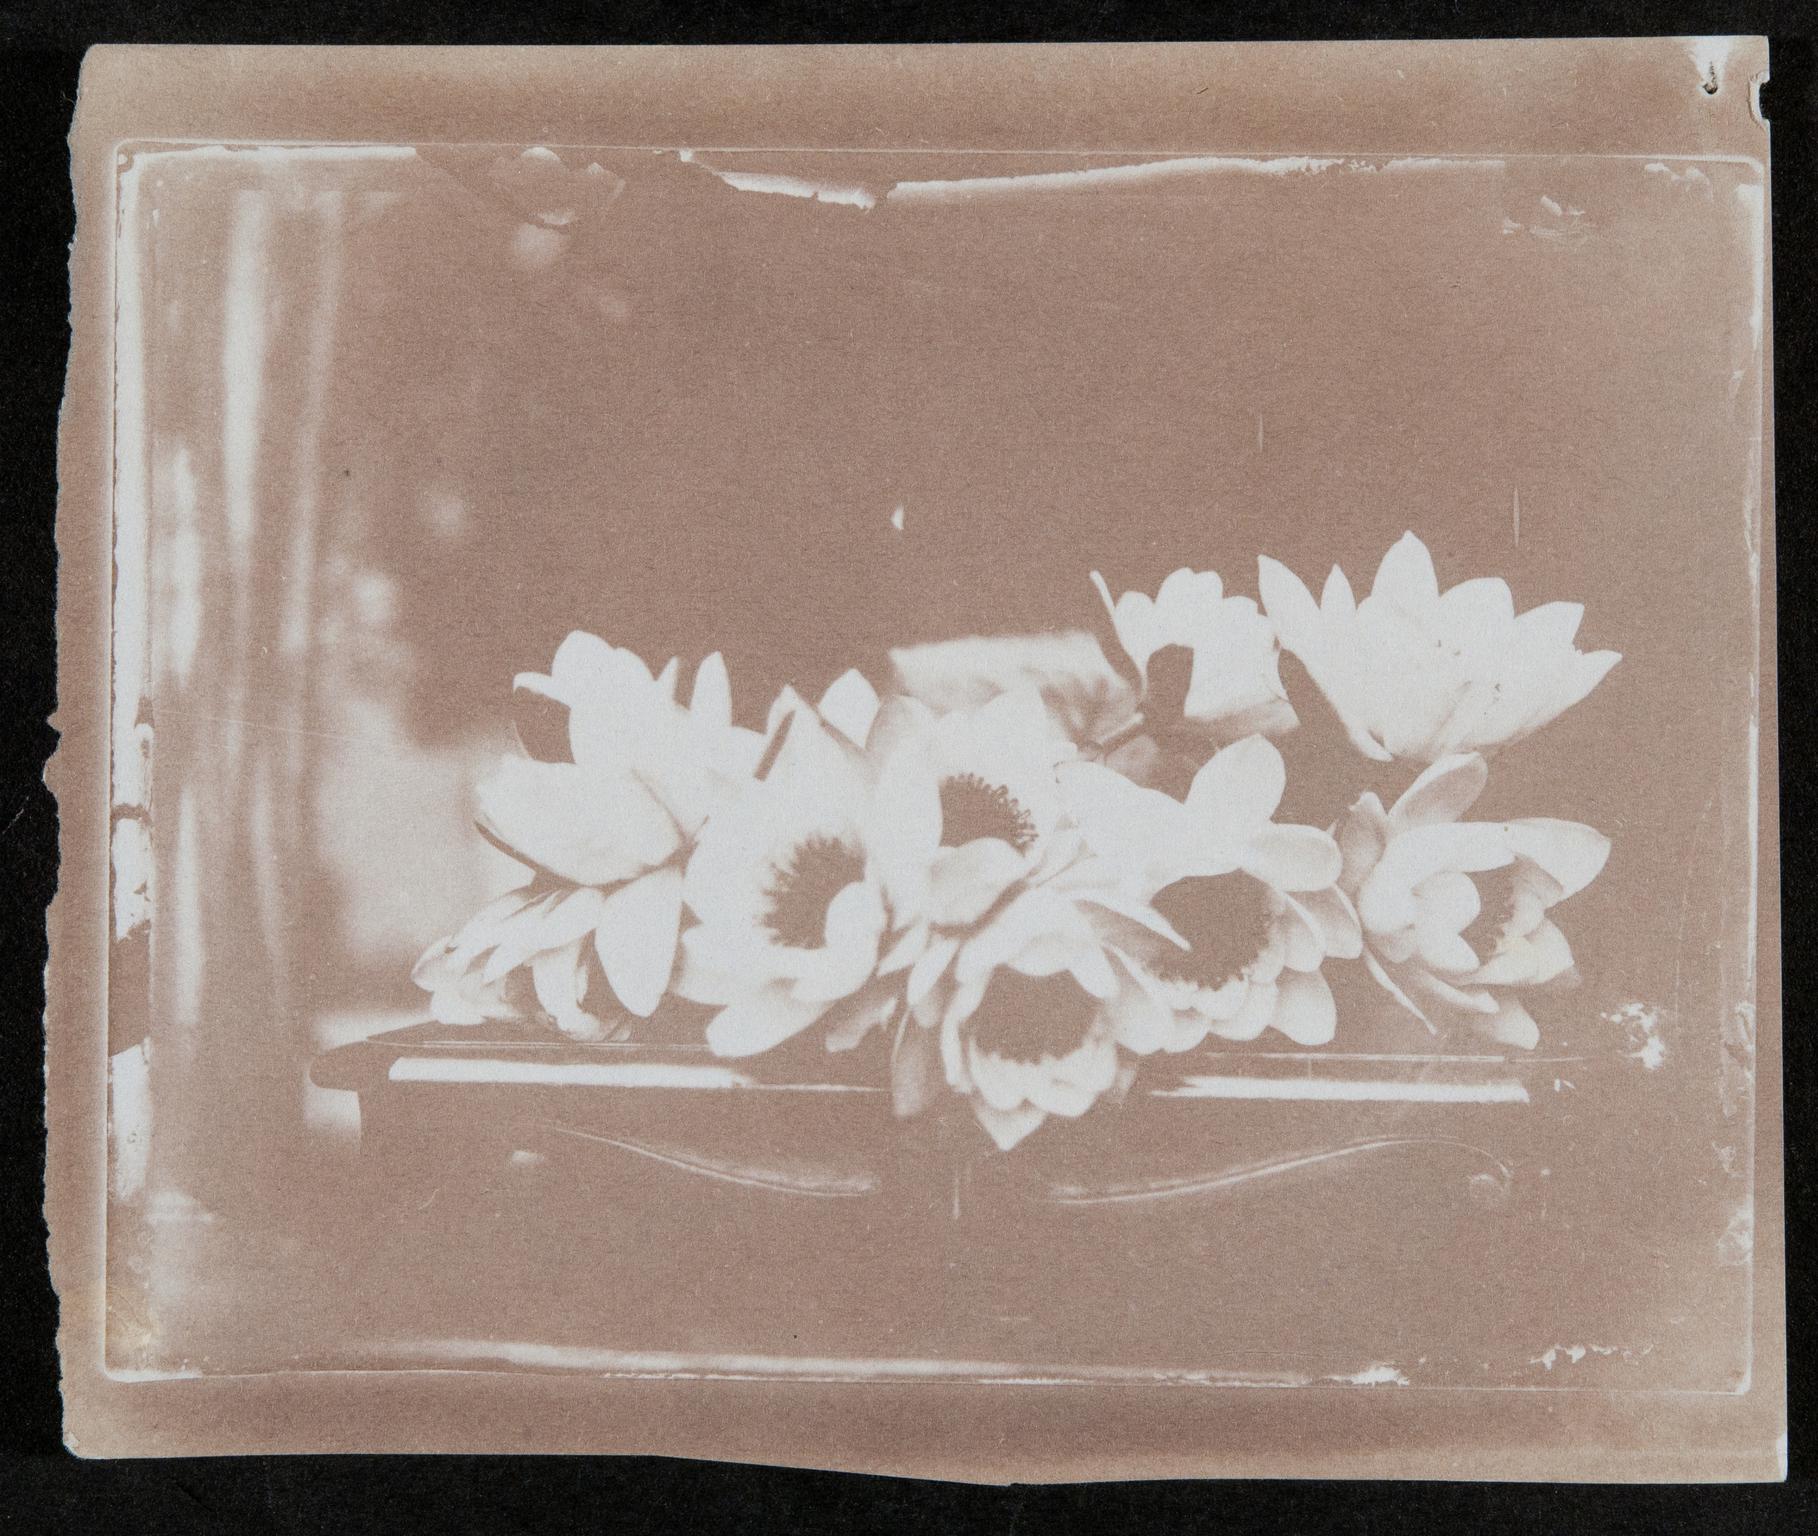 Water lilies, photograph